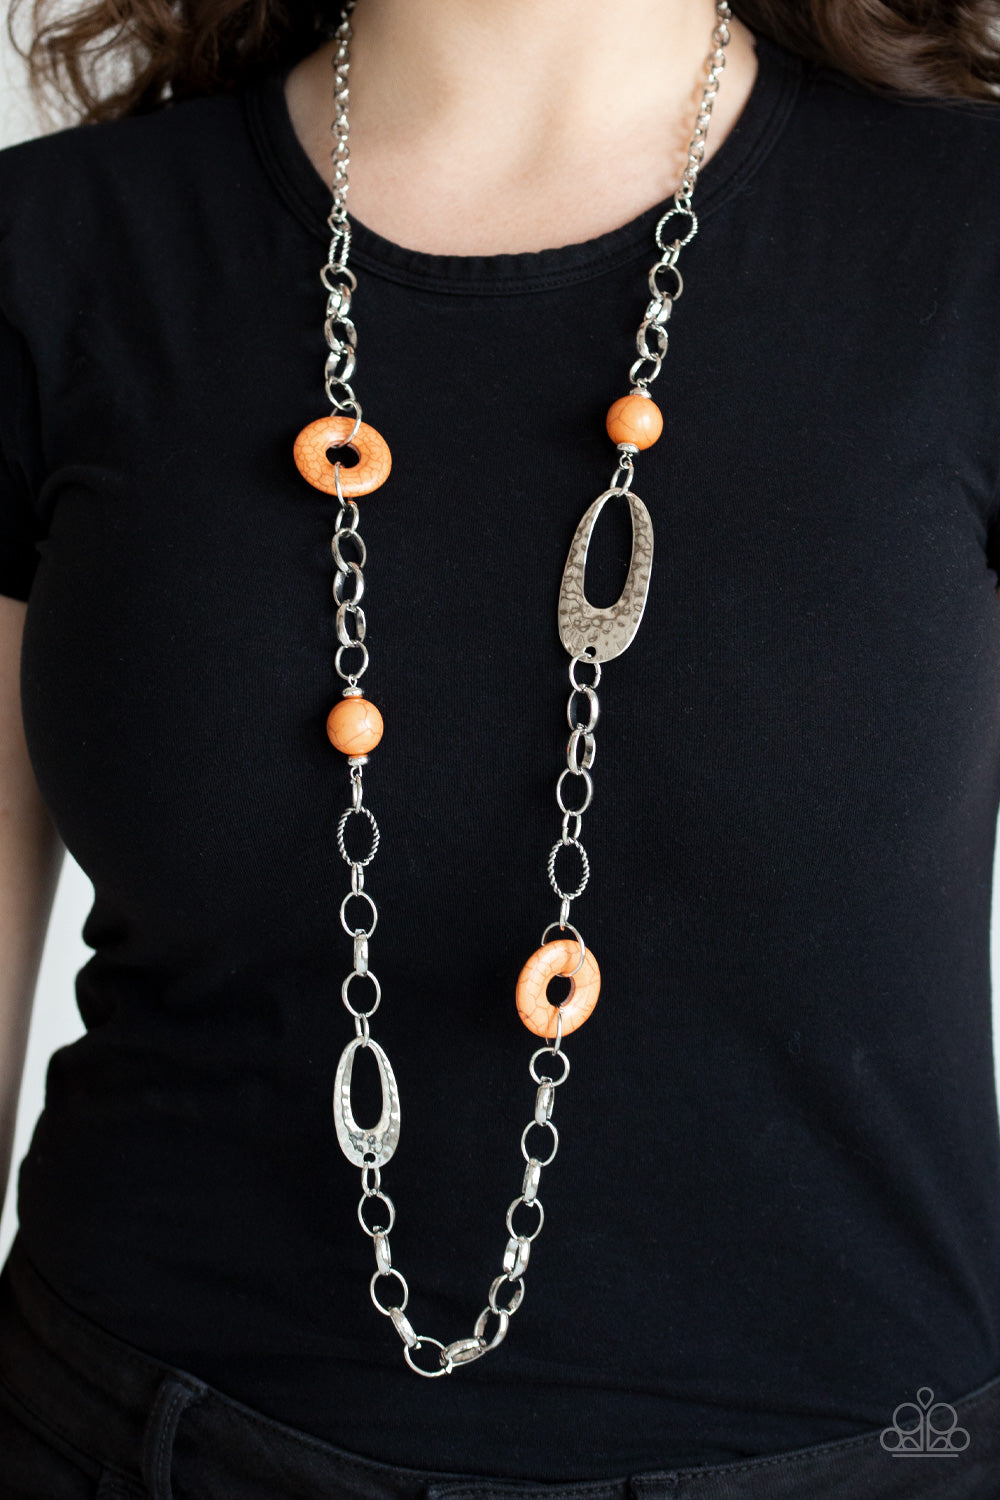 Paparazzi Artisan Artifact - Orange Stone Beads - Silver Rings - Hammered Necklace & Earrings - $5 Jewelry With Ashley Swint